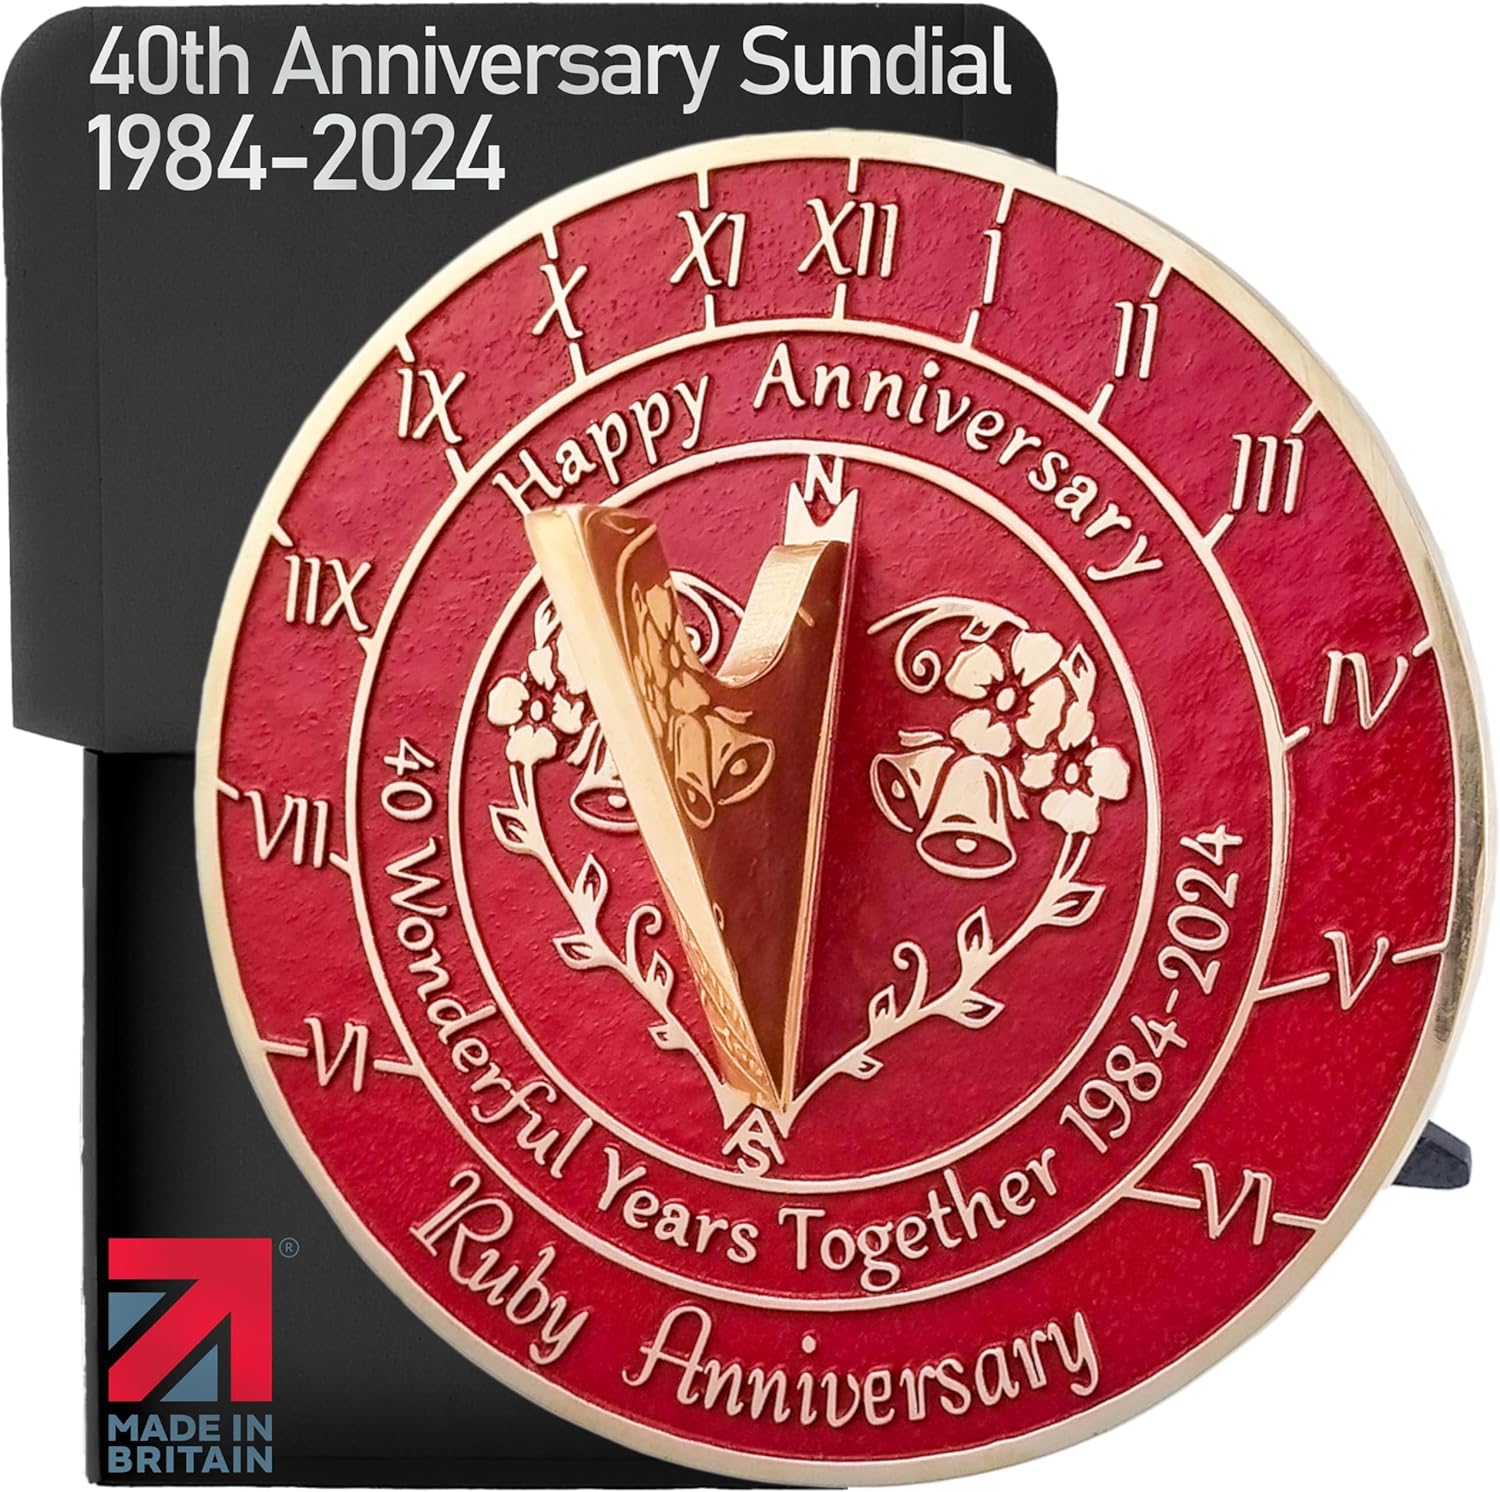 Anniversary Sundial Gift for 40th Ruby Wedding Anniversary in 2024 - Recycled Metal Home Decor Or Garden Present Idea - Handmade in UK for Him, Her Parents Or Couples 40 Year Celebration